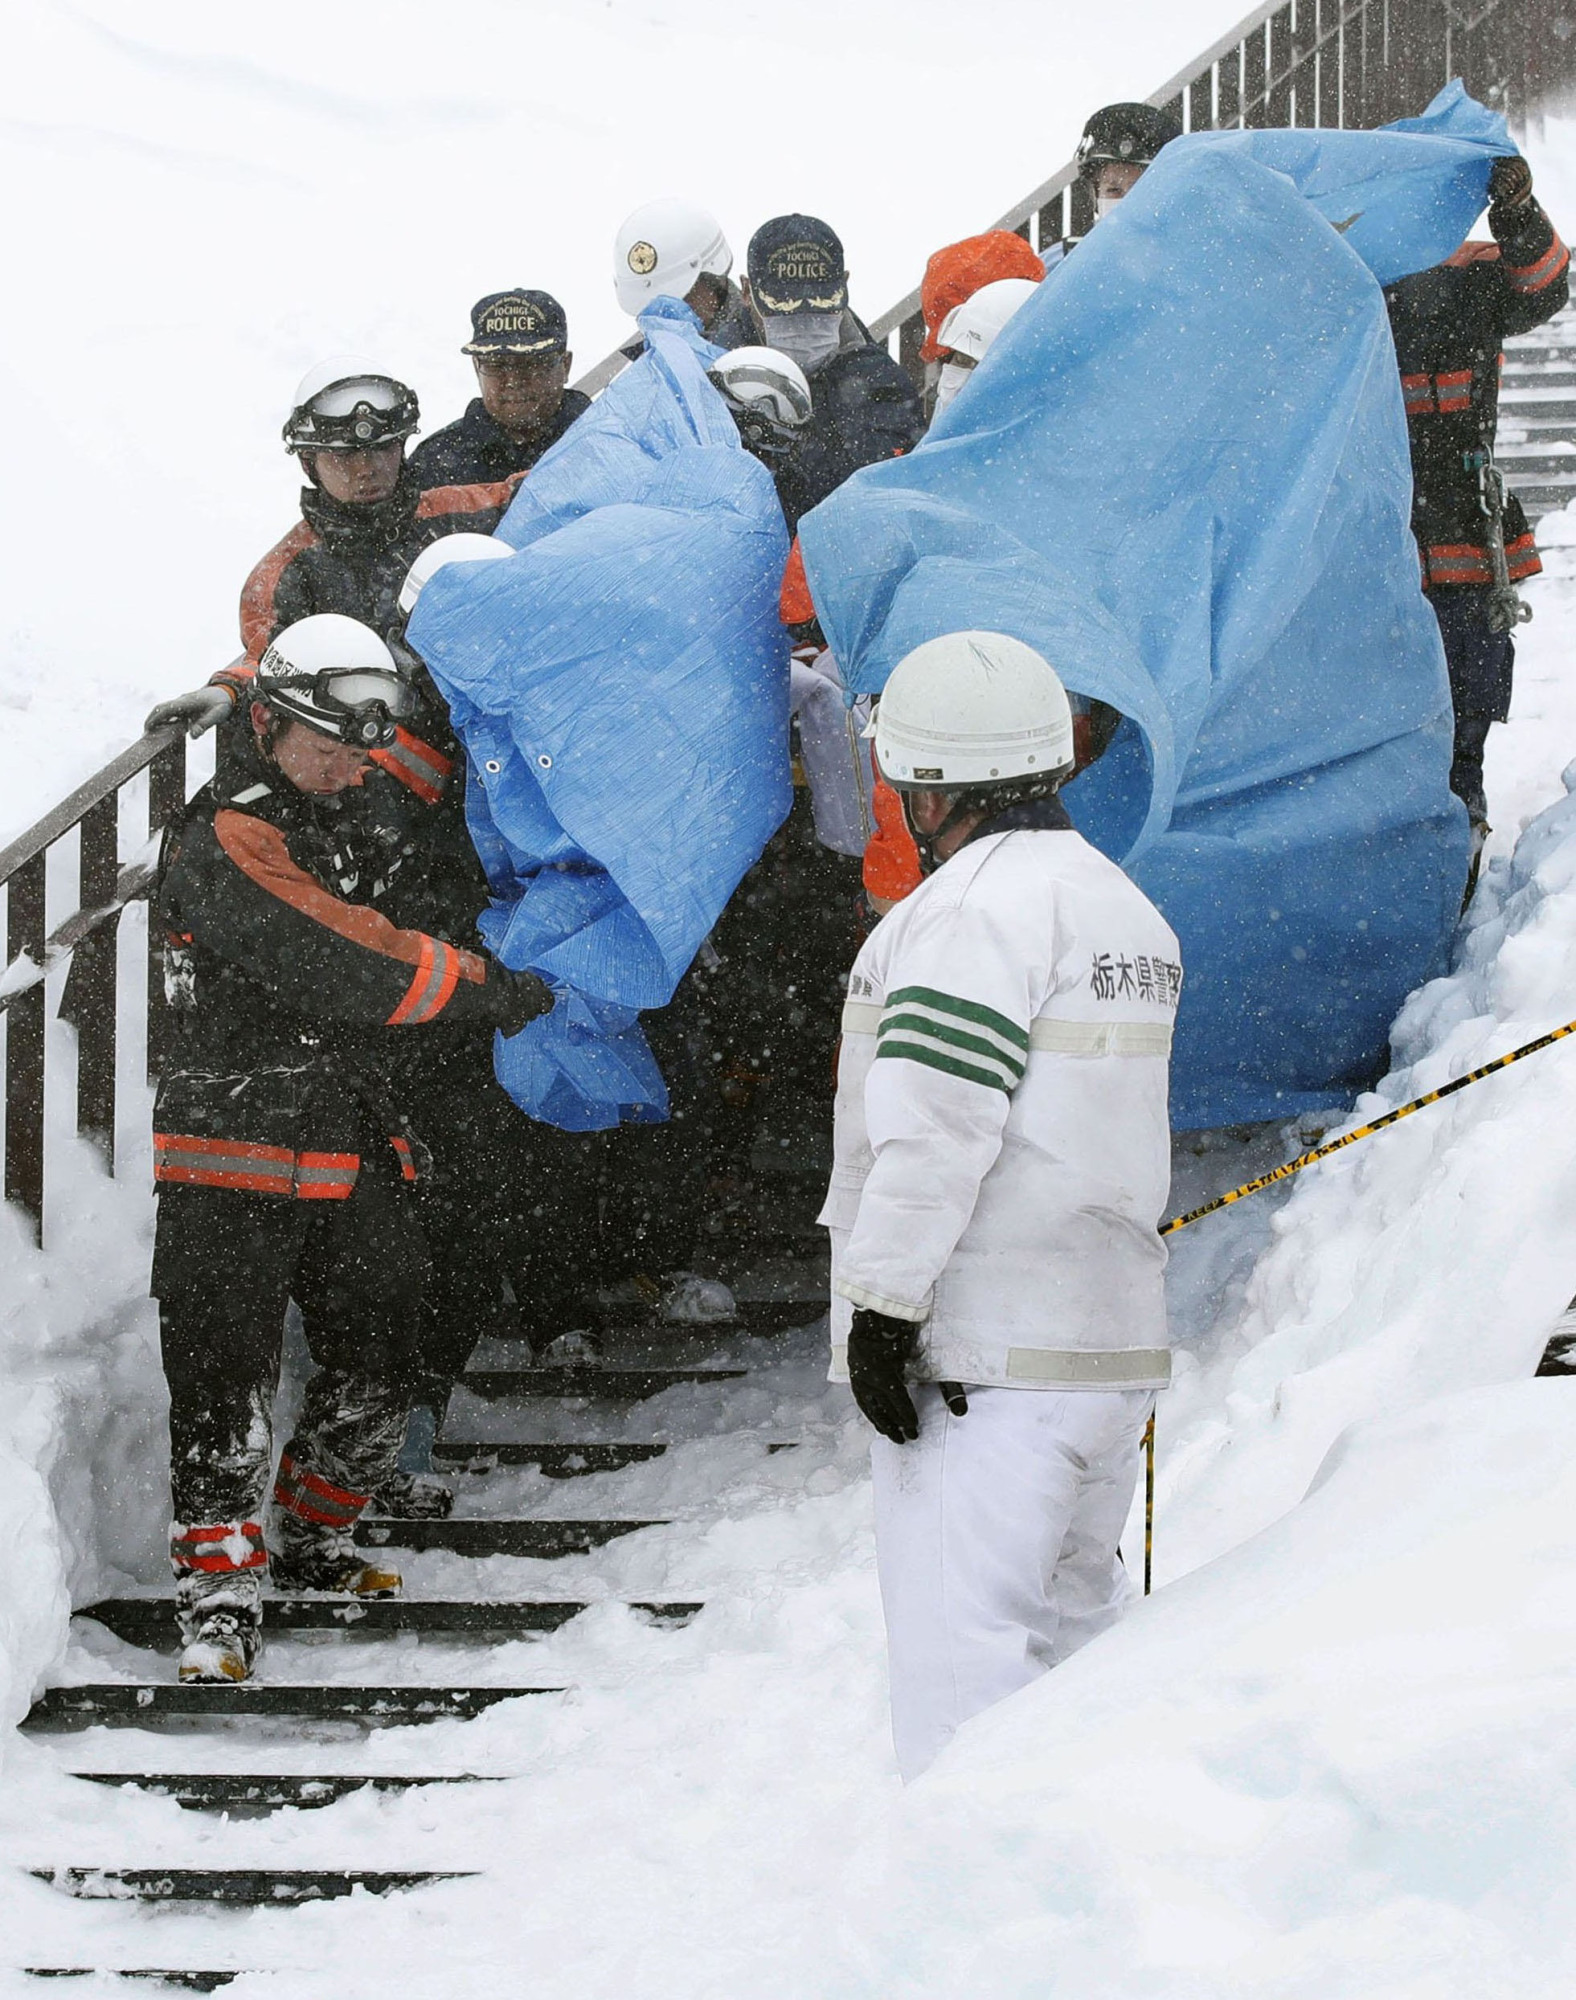 Eight Feared Dead Due To Avalanche At Tochigi Ski Resort The Japan Times